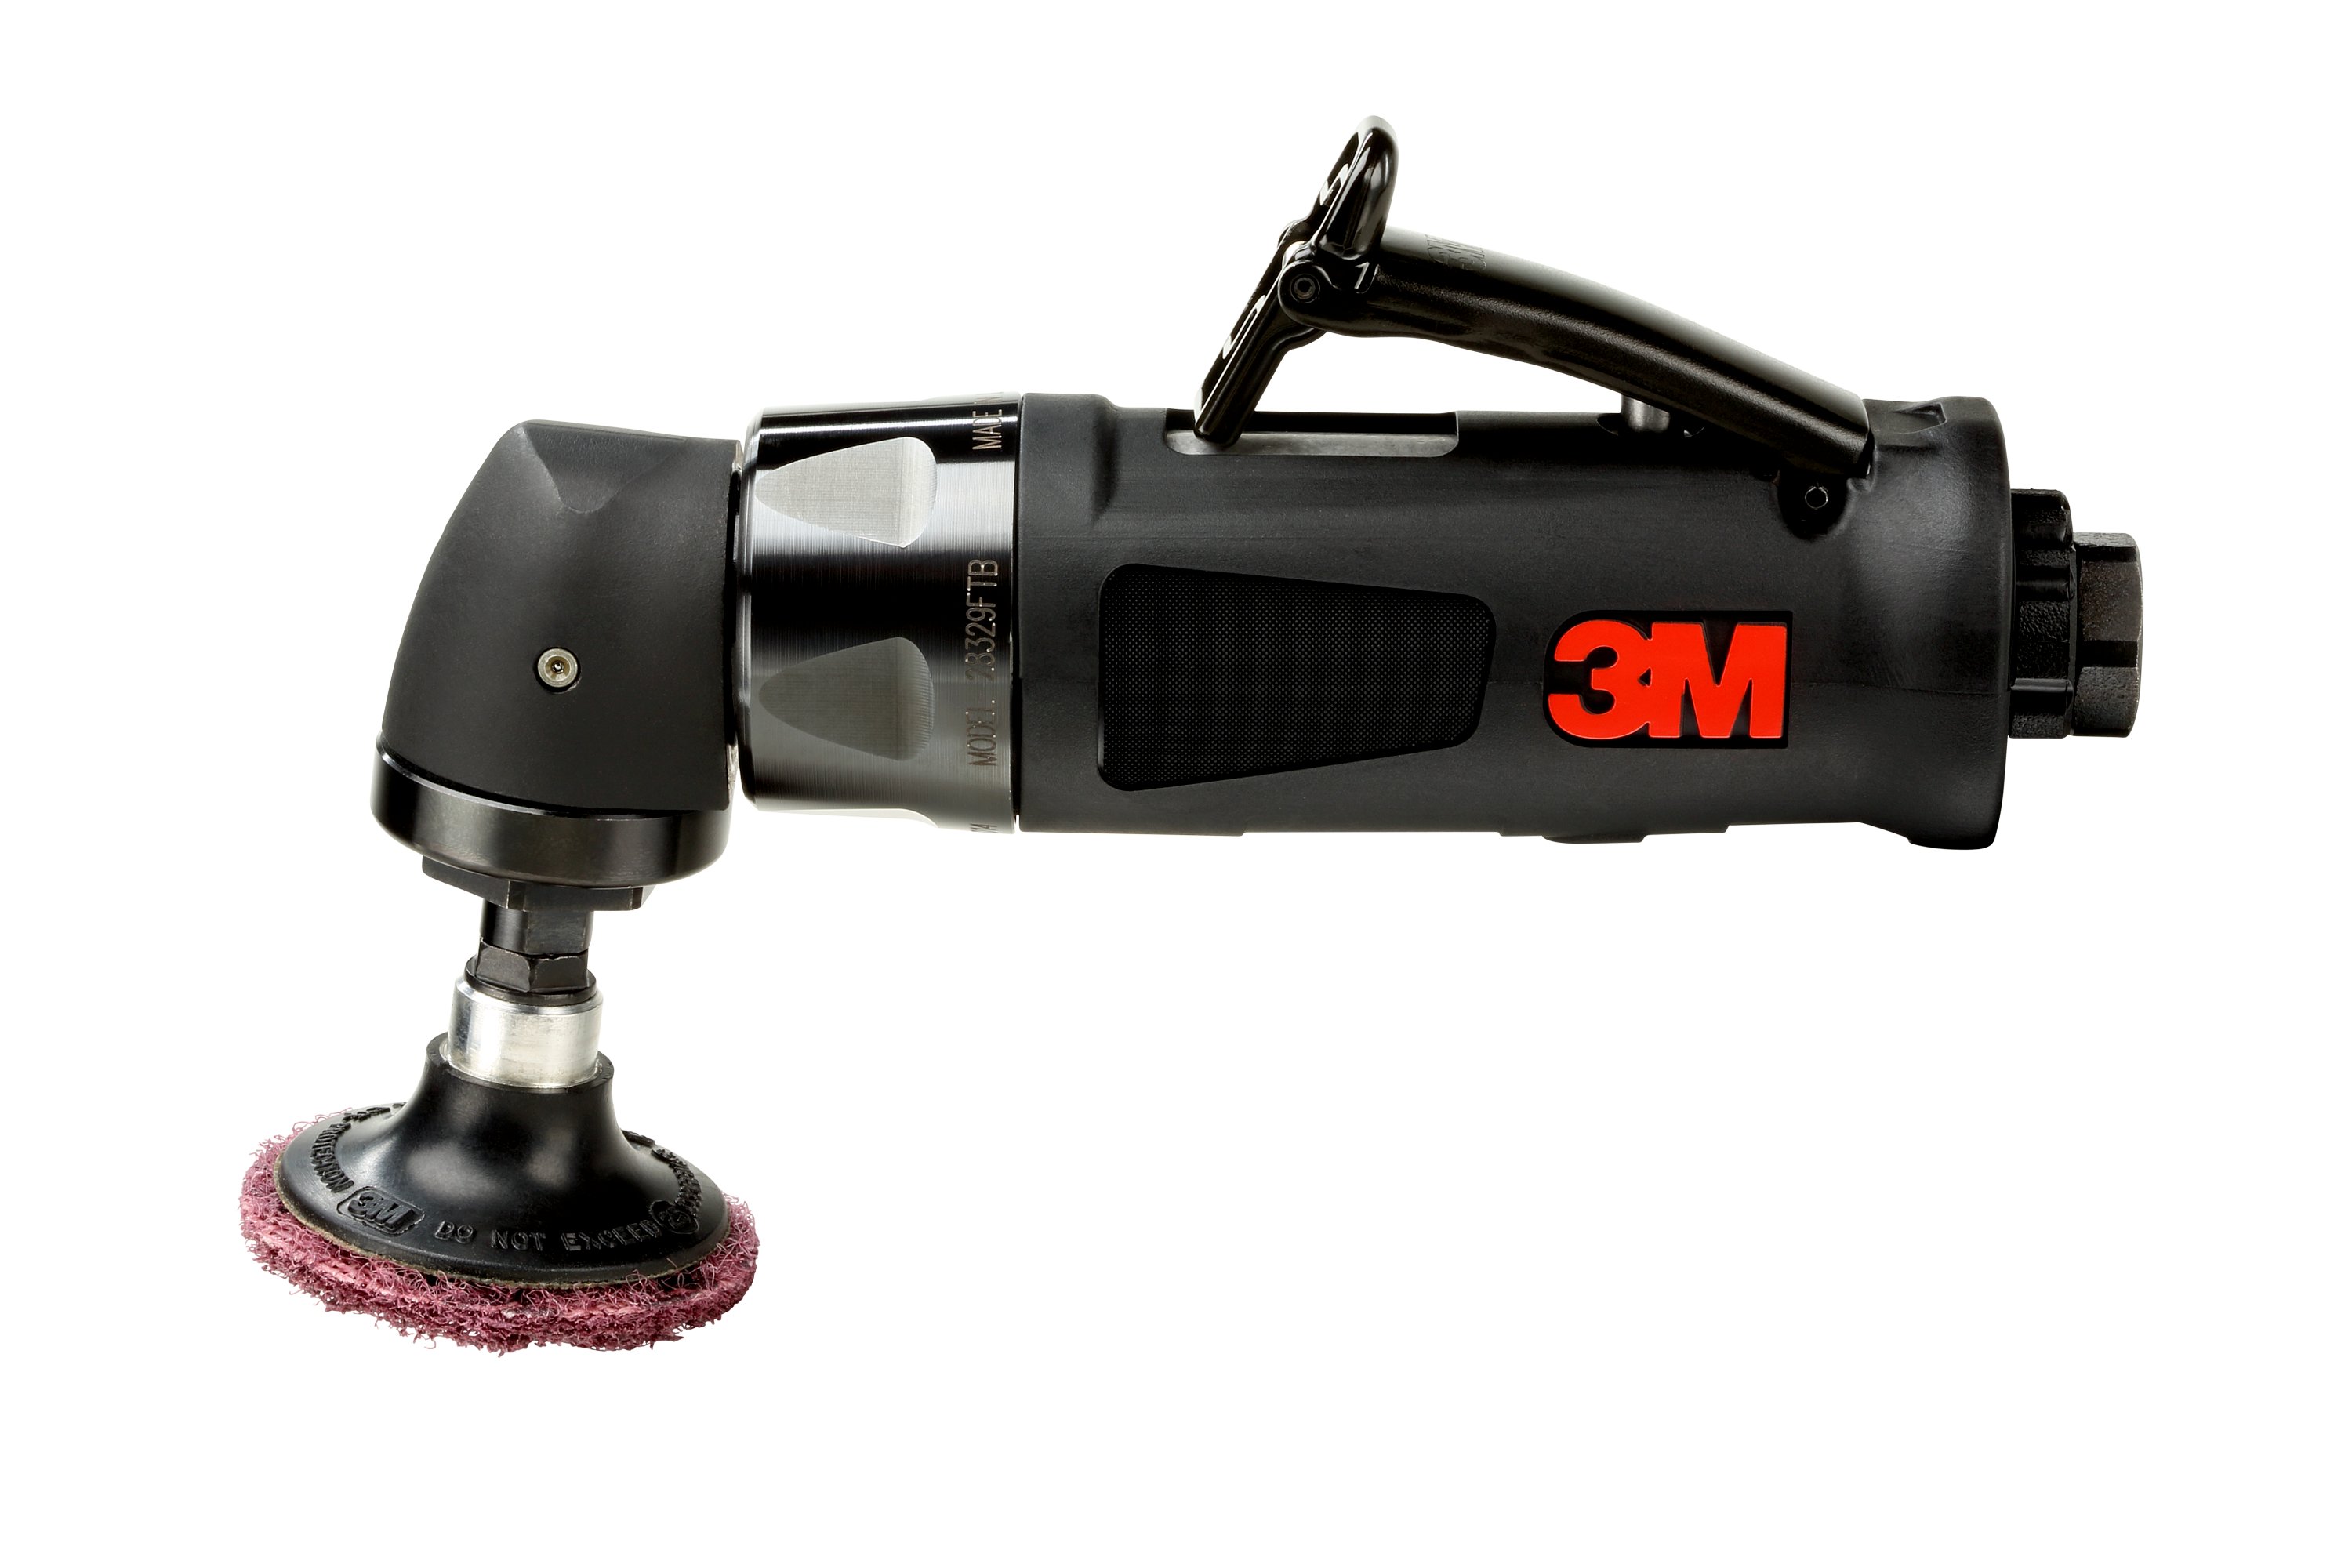 3M™ Disc Sanders have a lightweight, compact design and a 97-degree head that allows for greater wrist comfort and control